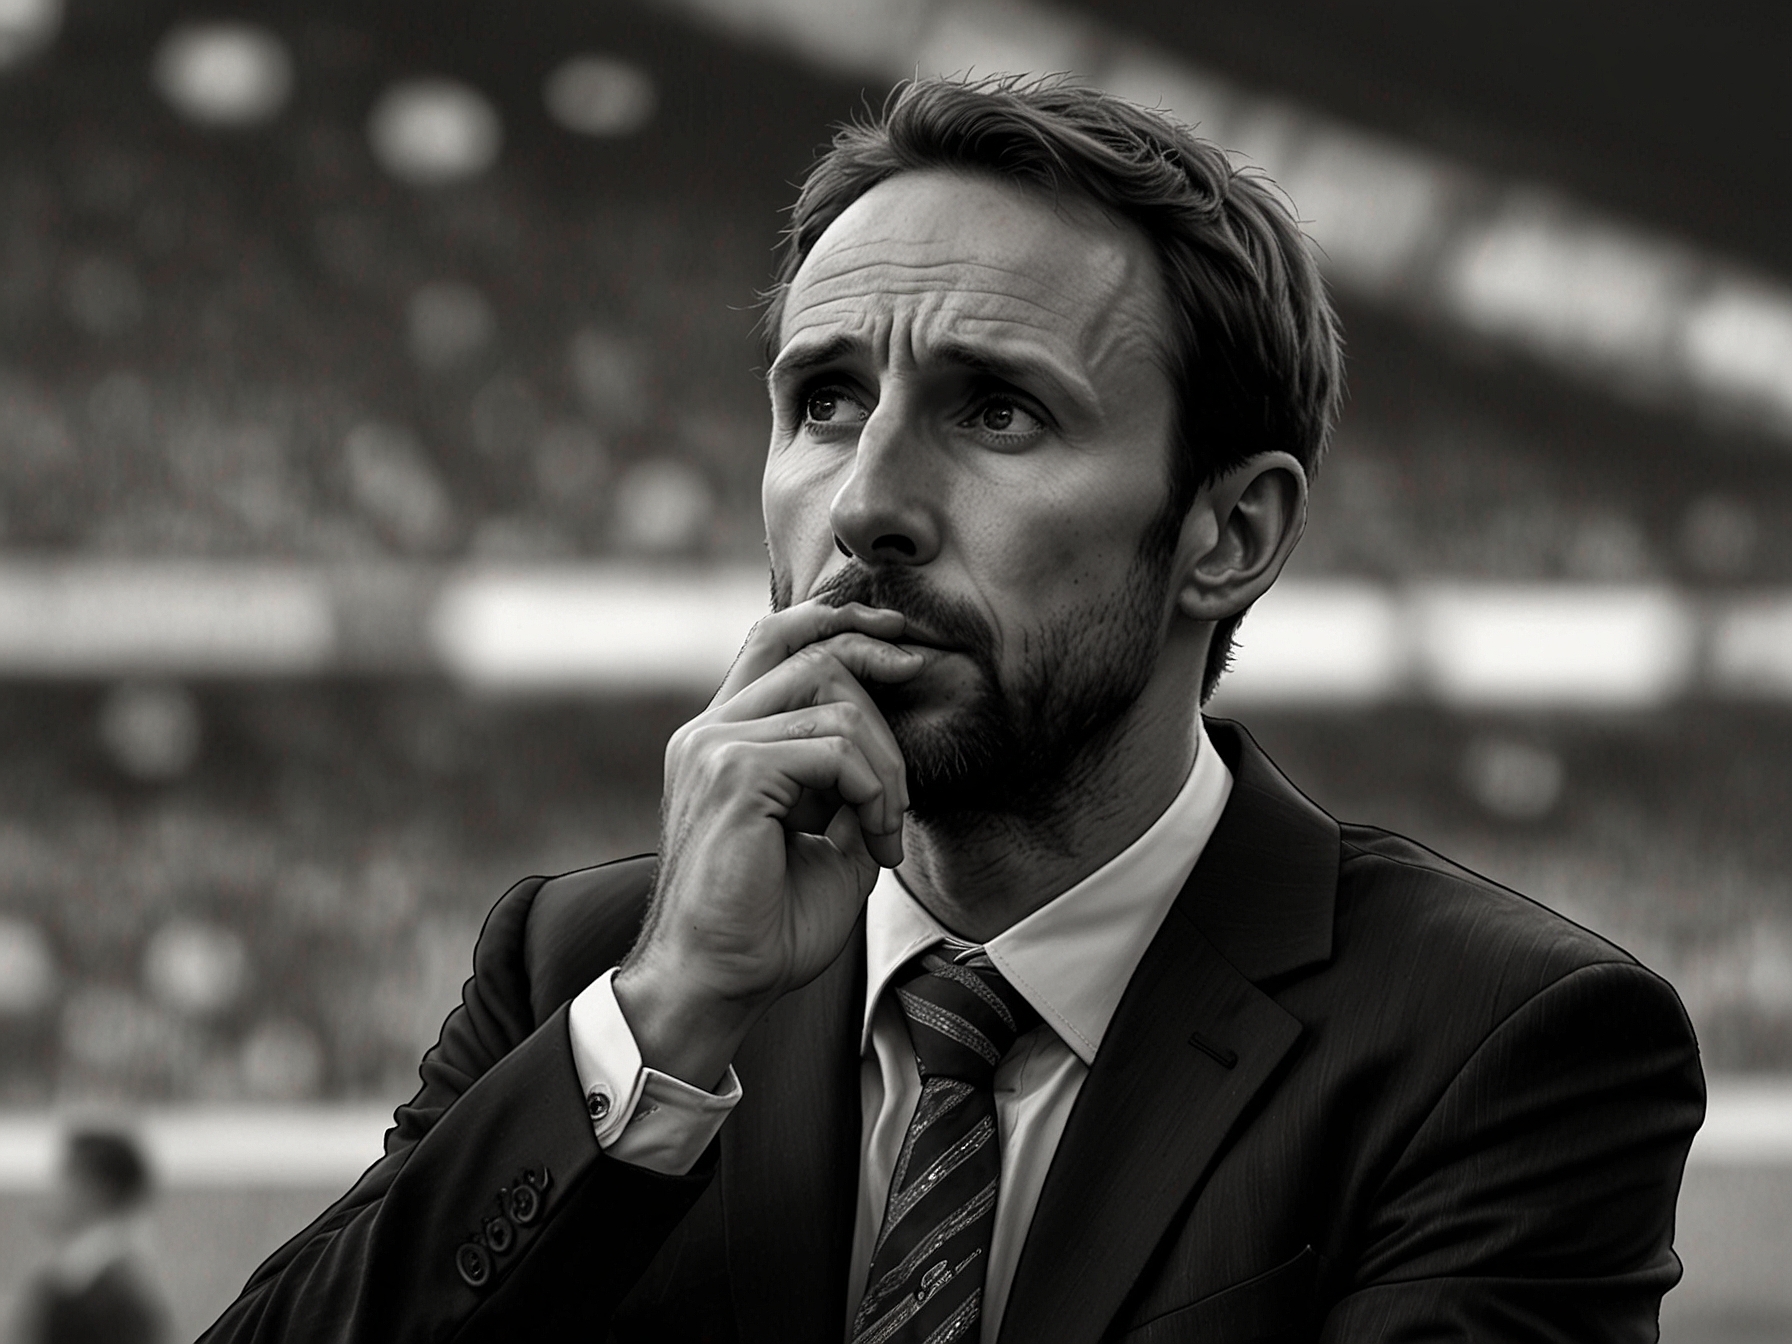 Gareth Southgate ponders tactics on the sidelines during an international match, symbolizing his efforts to solve England's longstanding midfield issues.